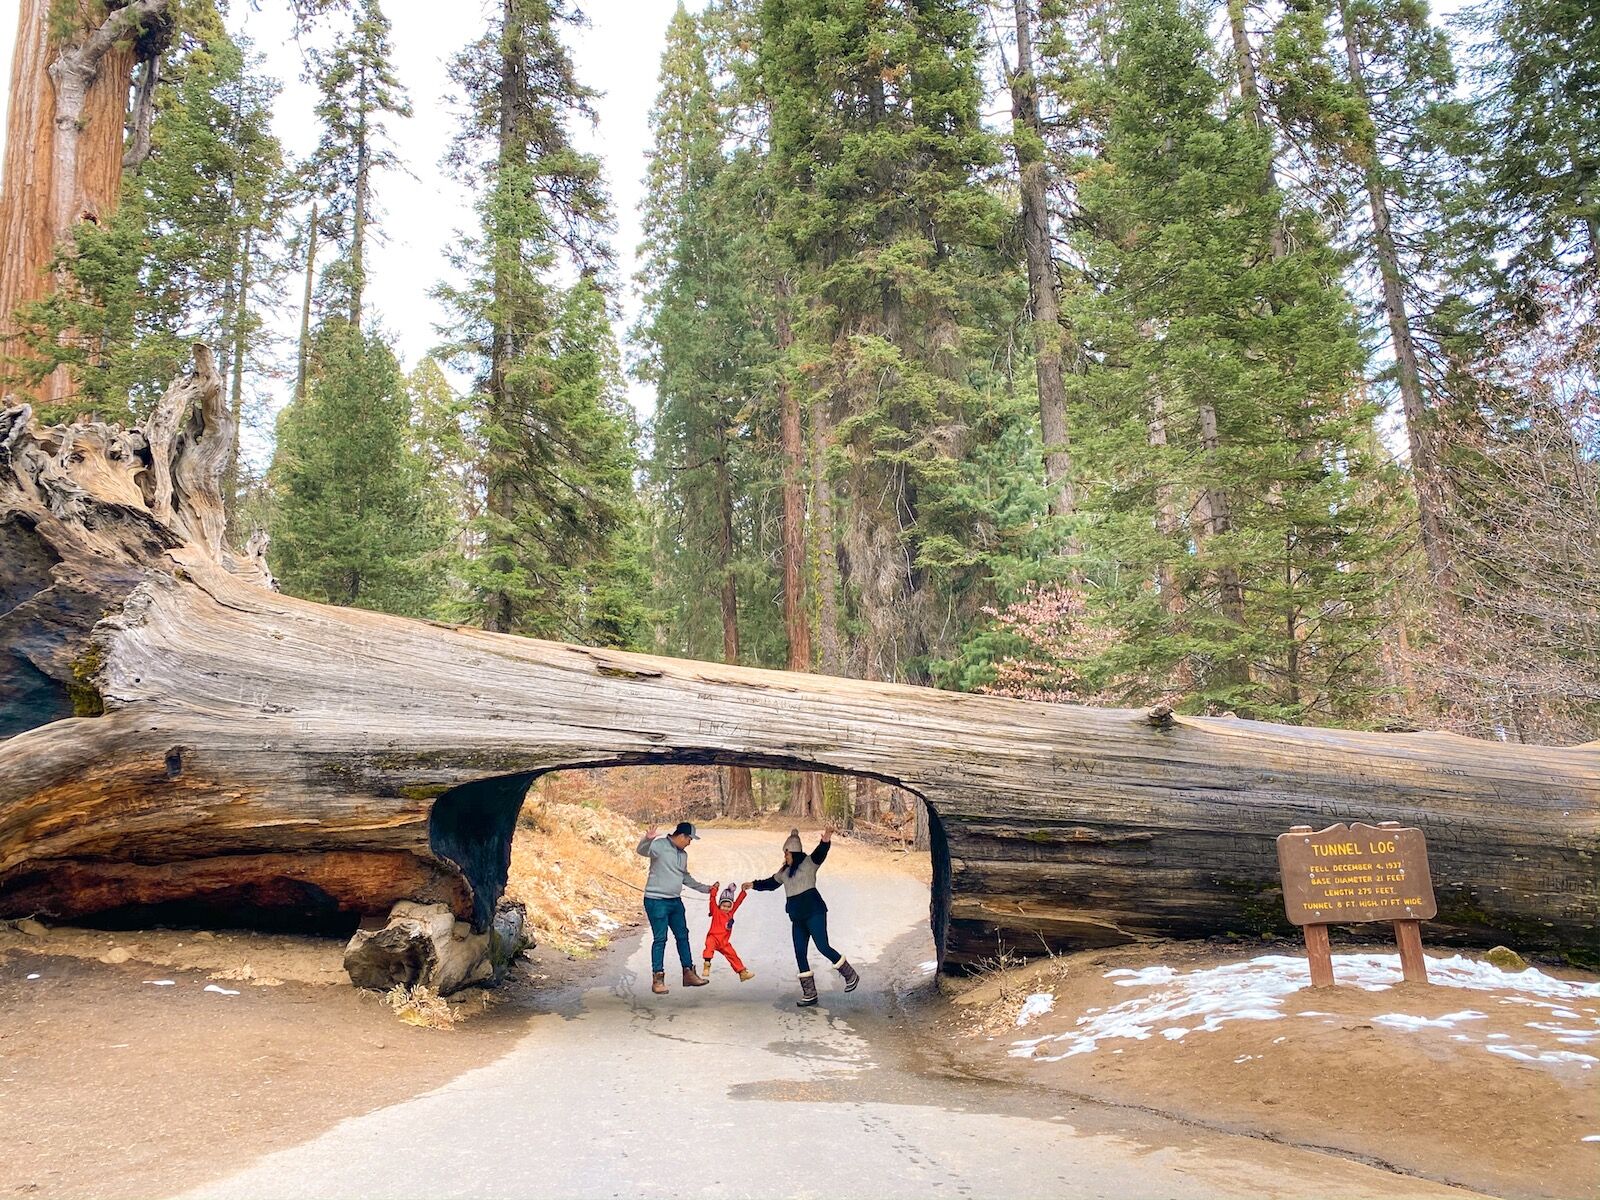 Sequoia National Park's tunnel tree